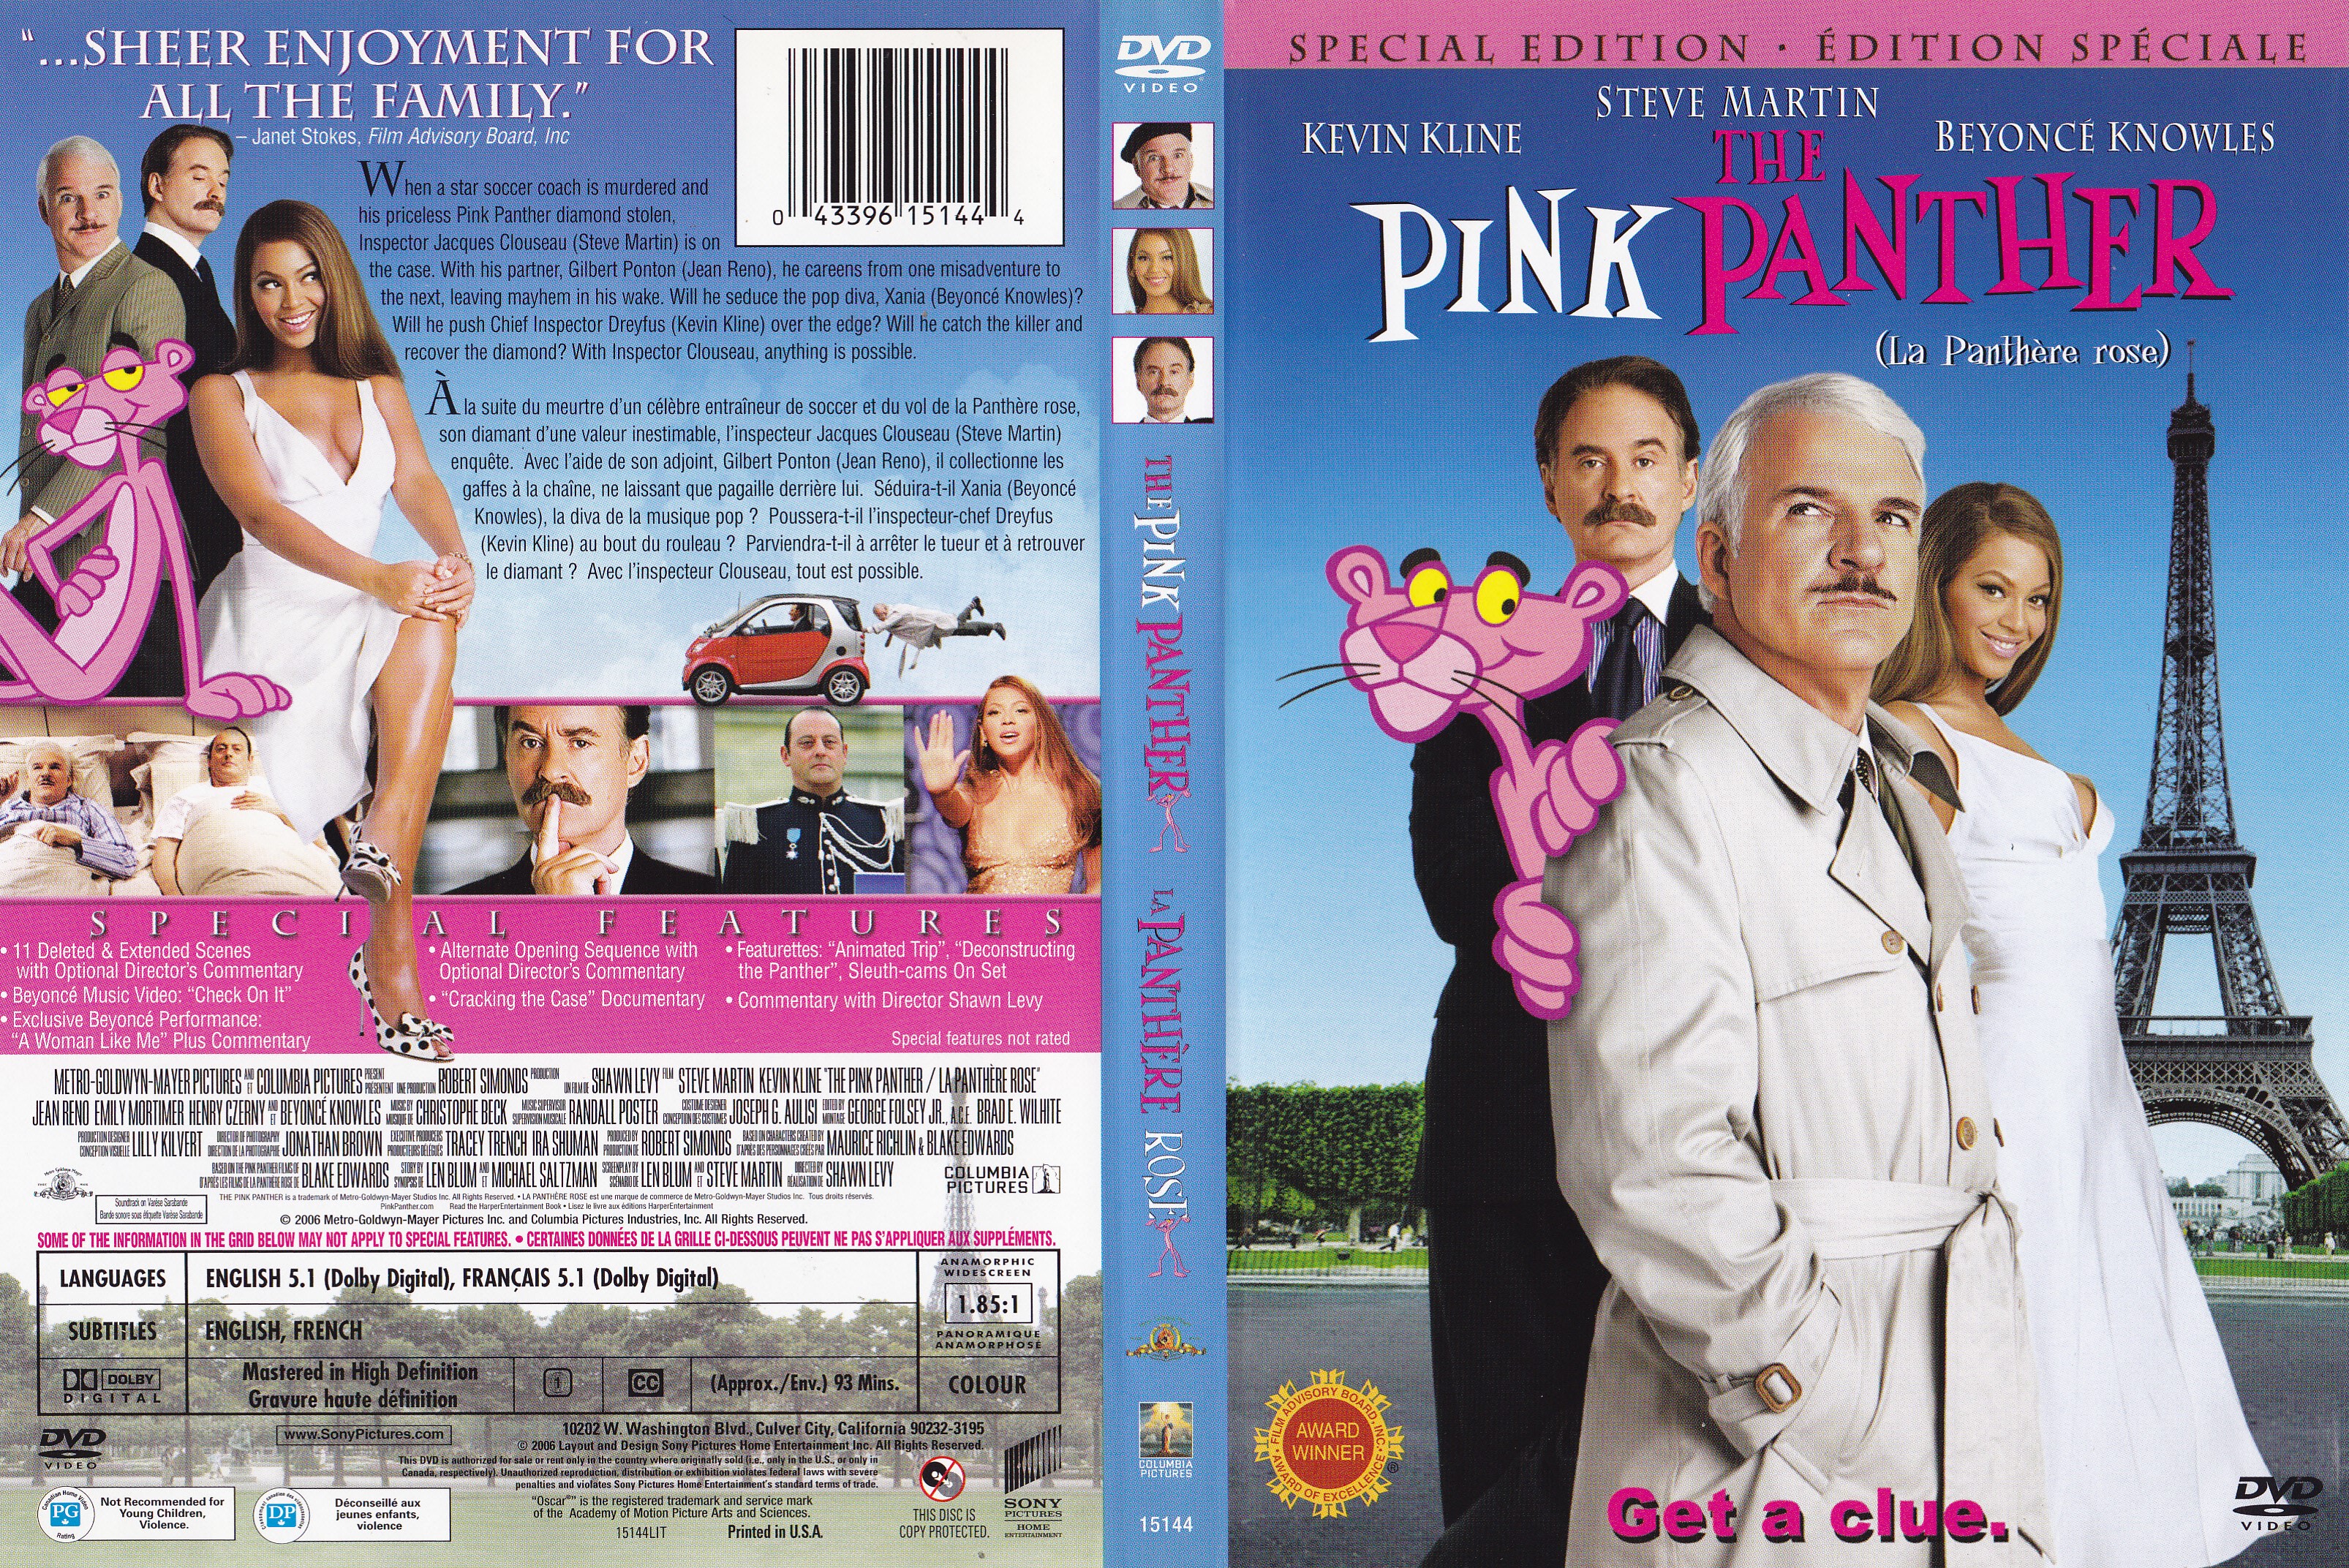 Jaquette DVD The pink panther -  La panthere rose (Canadienne)